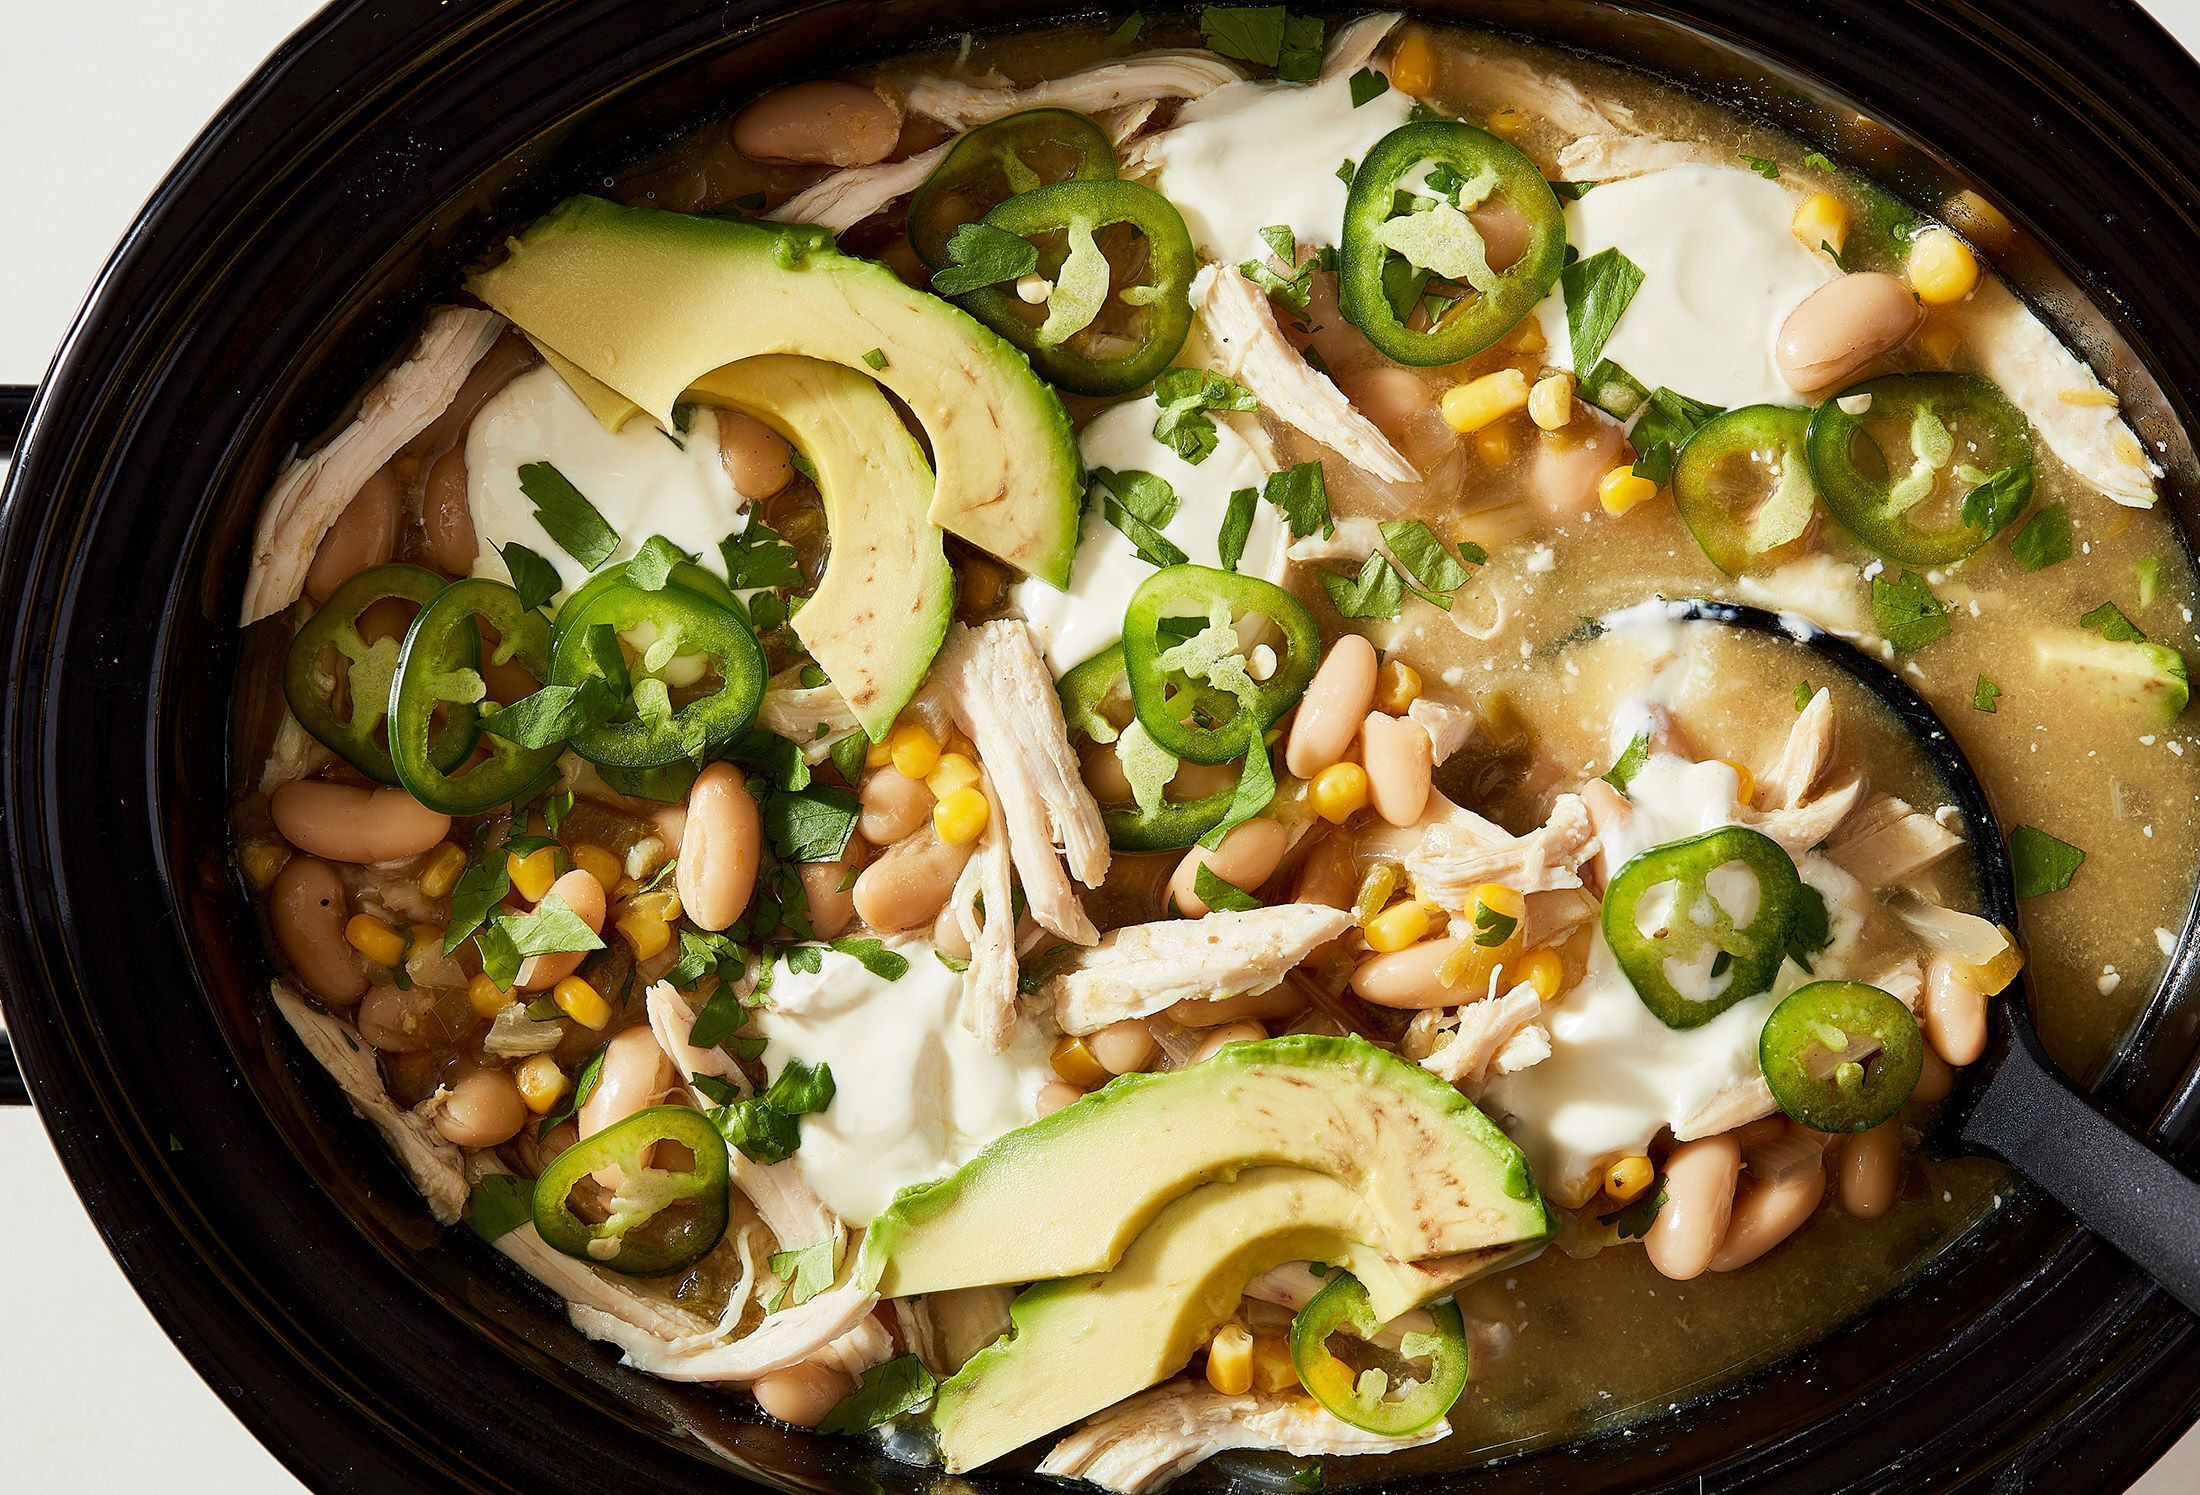 9x13 Crockpot Recipes To Make Your Life Easier